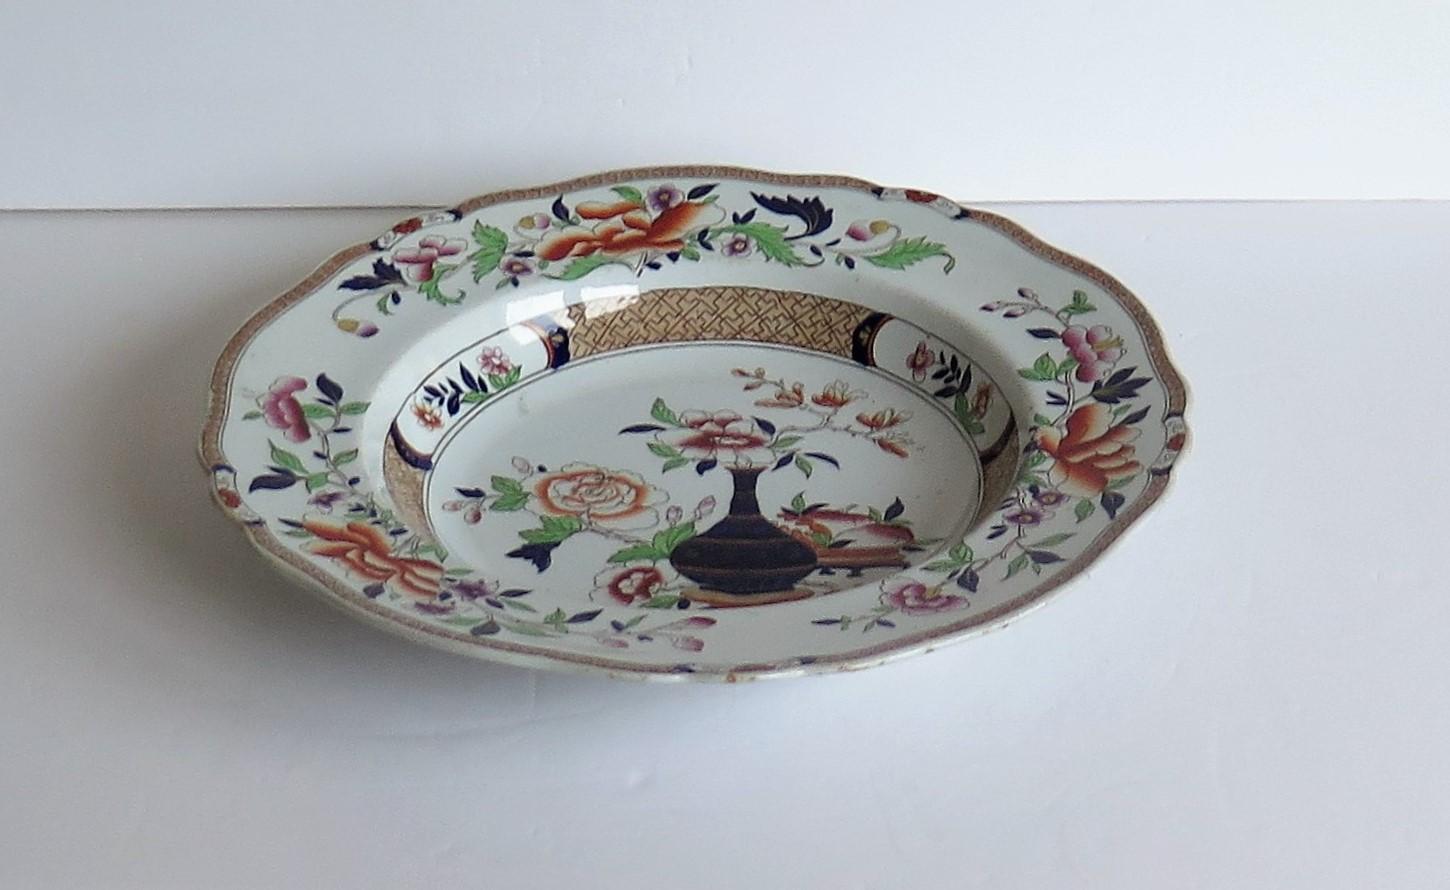 This is a very decorative, Imperial Stone China (ironstone), large deep plate or soup bowl by John Ridgway, dating to the William IV period of the 19th century, circa 1835.

This plate has been carefully hand painted, over a printed outline, in